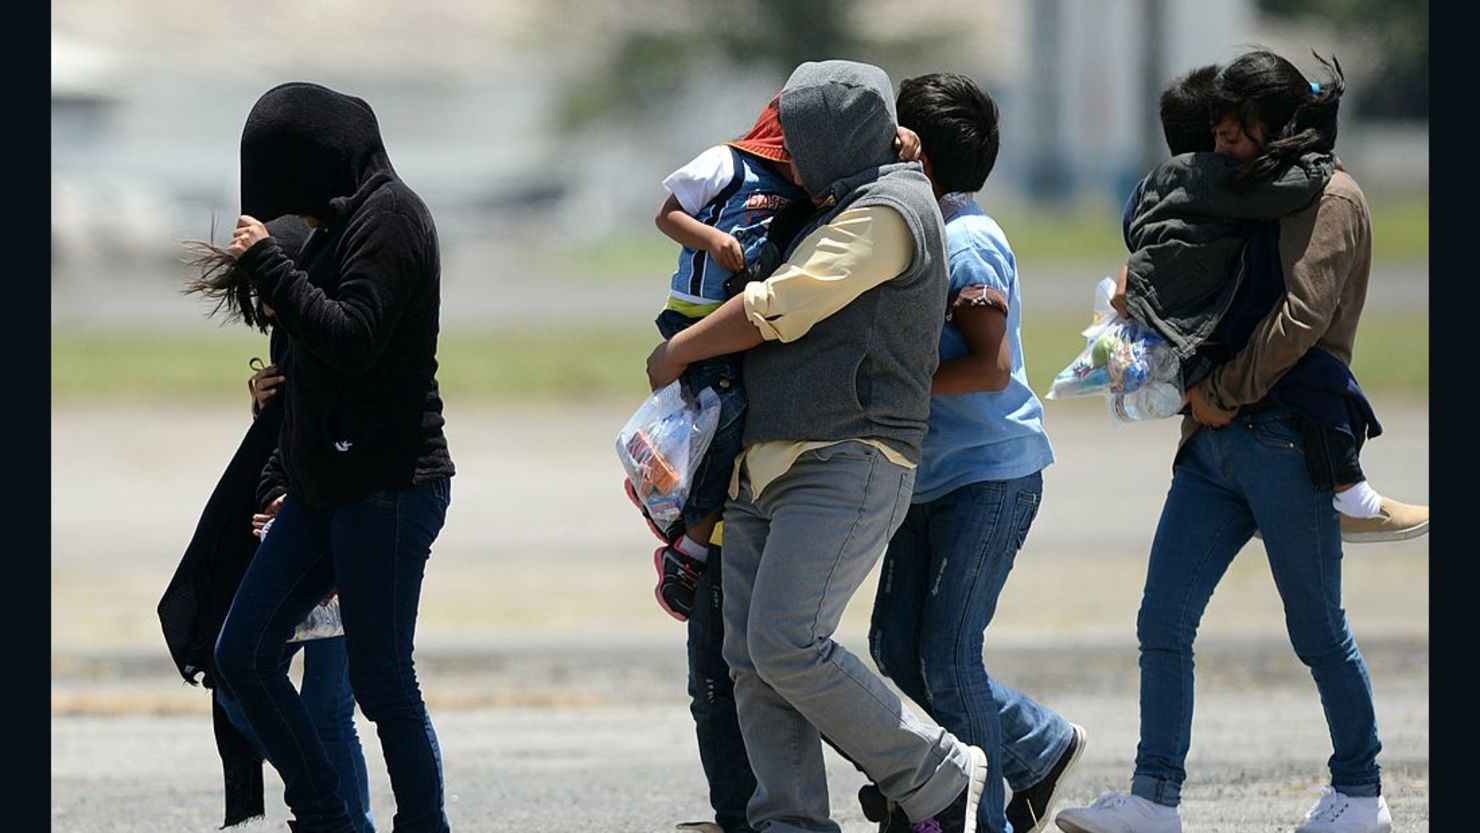 Immigrant children and their mothers arrive in Guatemala after being deported from the United States in 2014. The migrants had come to the U.S. to flee a humanitarian crisis in their homeland.